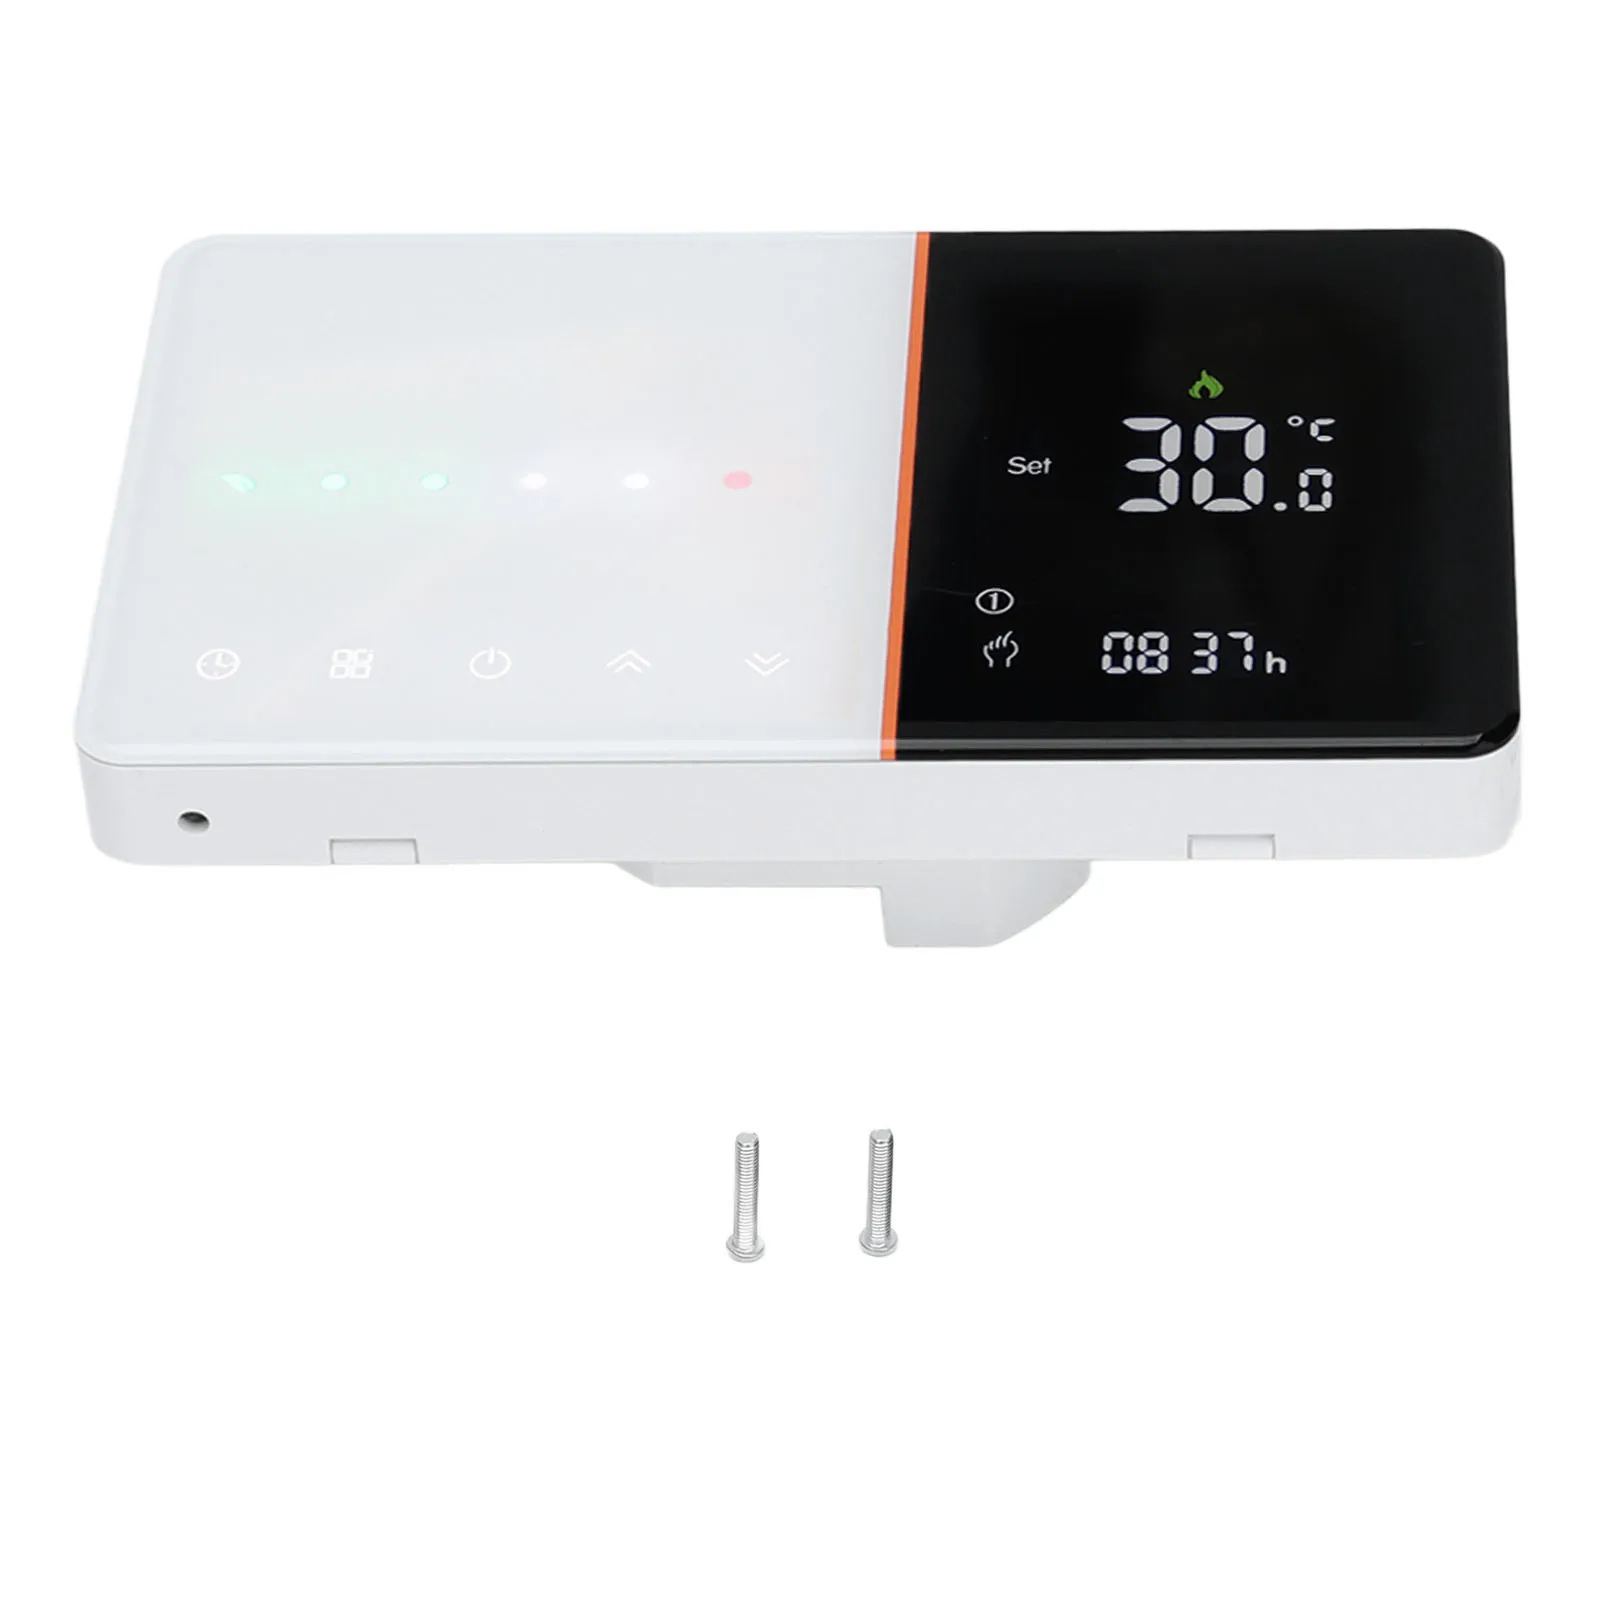 

LCD Thermostat Sturdy Durable Smart Thermostat for Boiler for Home